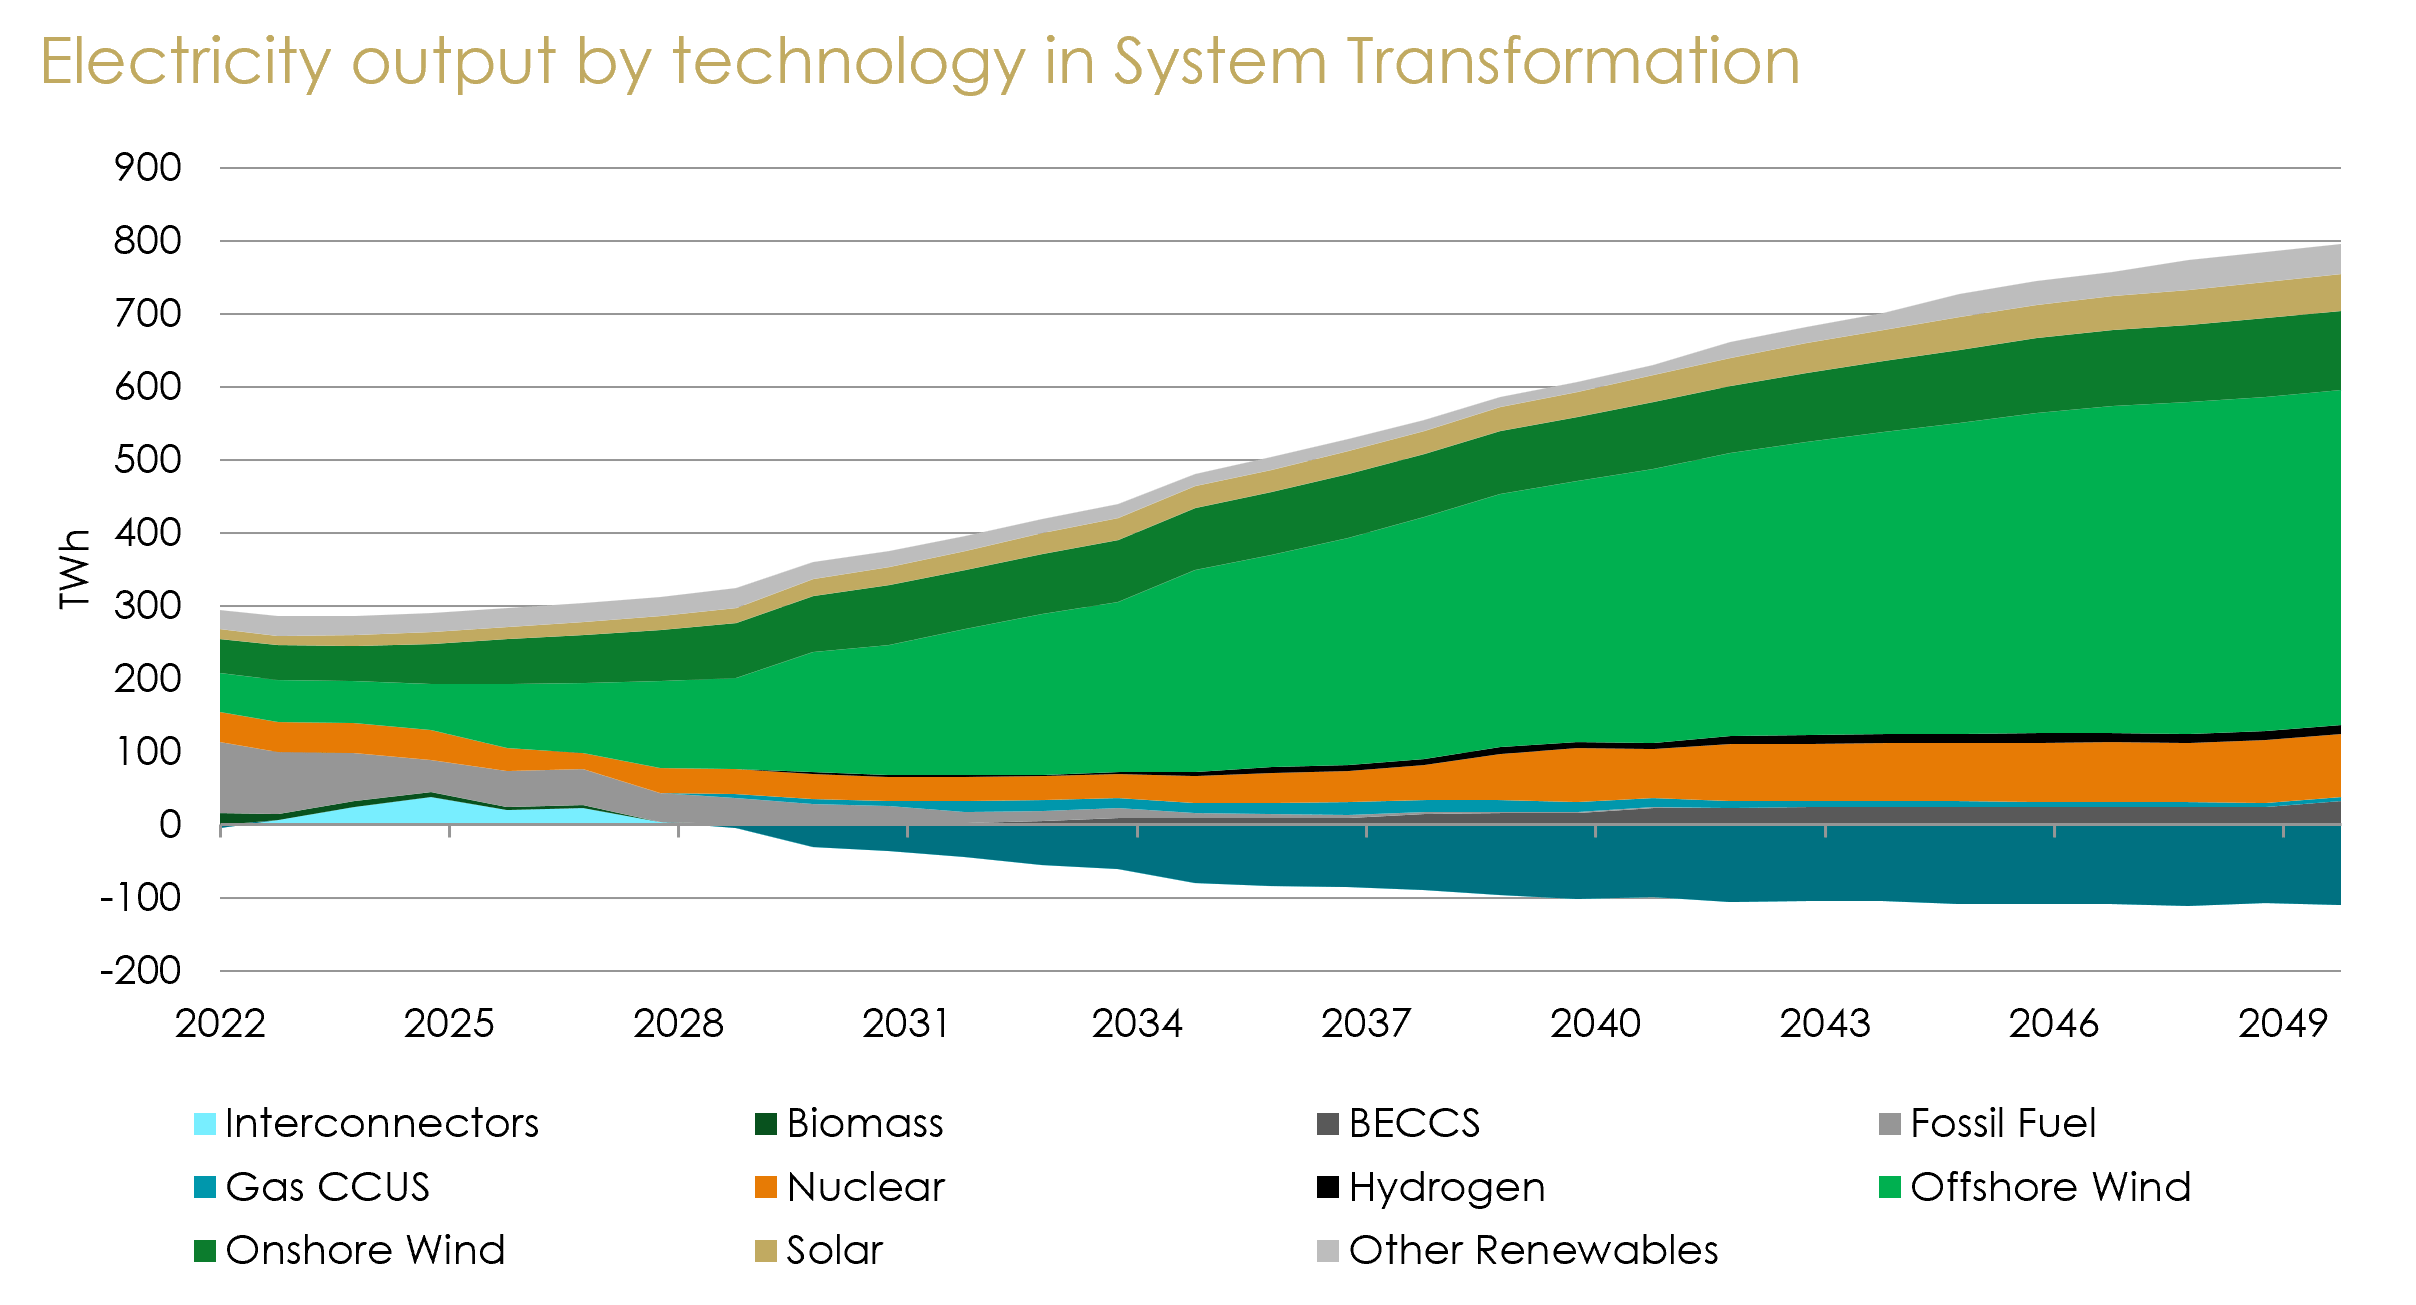 Electricity output by technology in System Transformationv